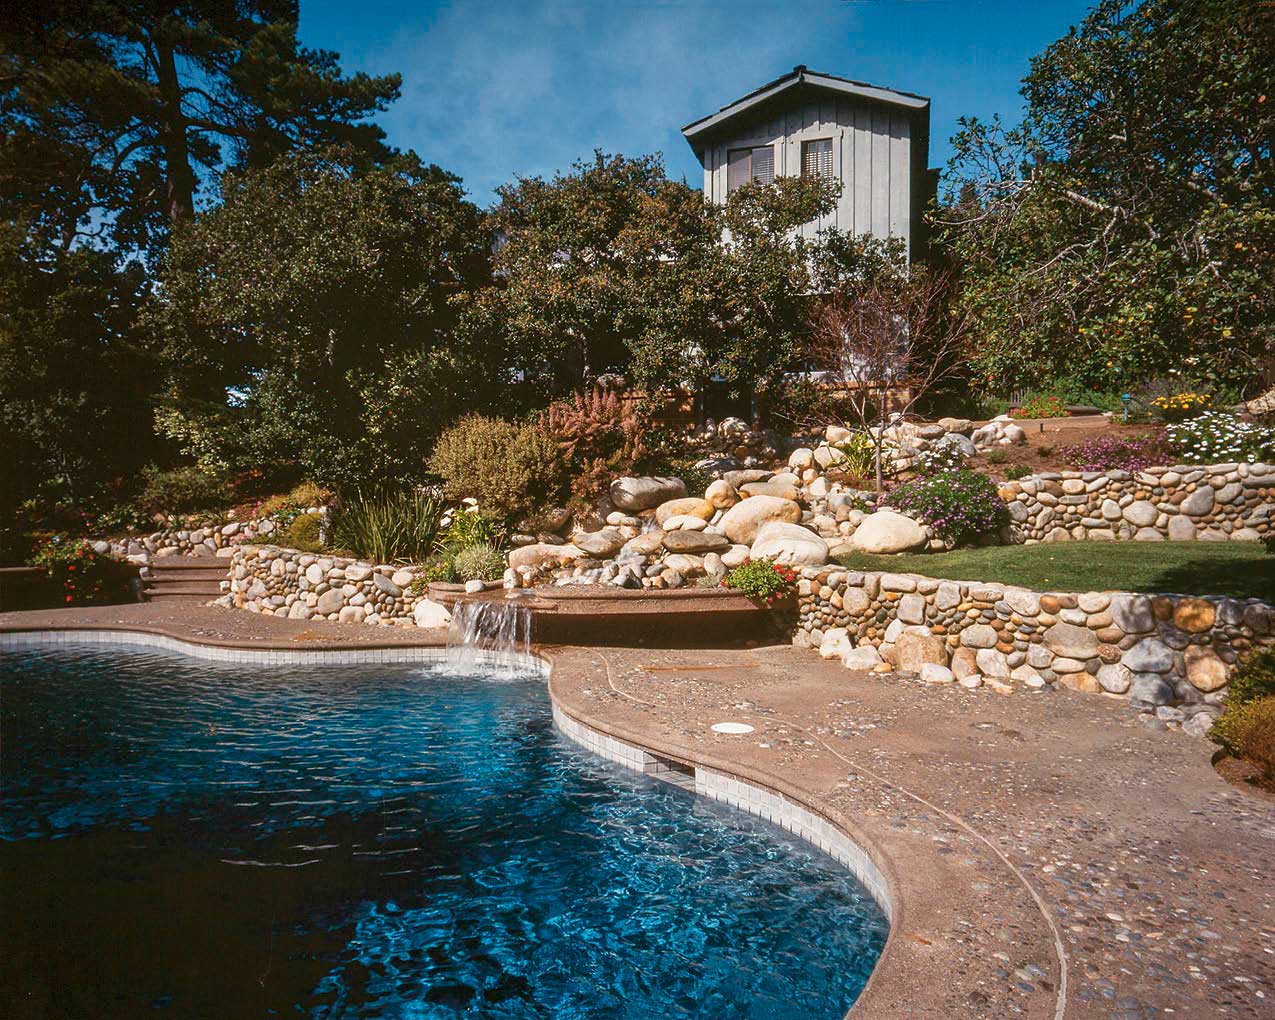 Aggregates take center stage in this pool setting in Carmel, California. River rocks ranging in size from 3 feet to 1/8 inch in diameter create a cliffside/waterfall feature, while natural rock aggregate sculpted and rounded by water creates a streambed effect on the pool deck, with sand washes and clusters of rock. The concretes tan integral color harmonizes with the aggregate. Photos courtesy of Tom Ralston Concrete